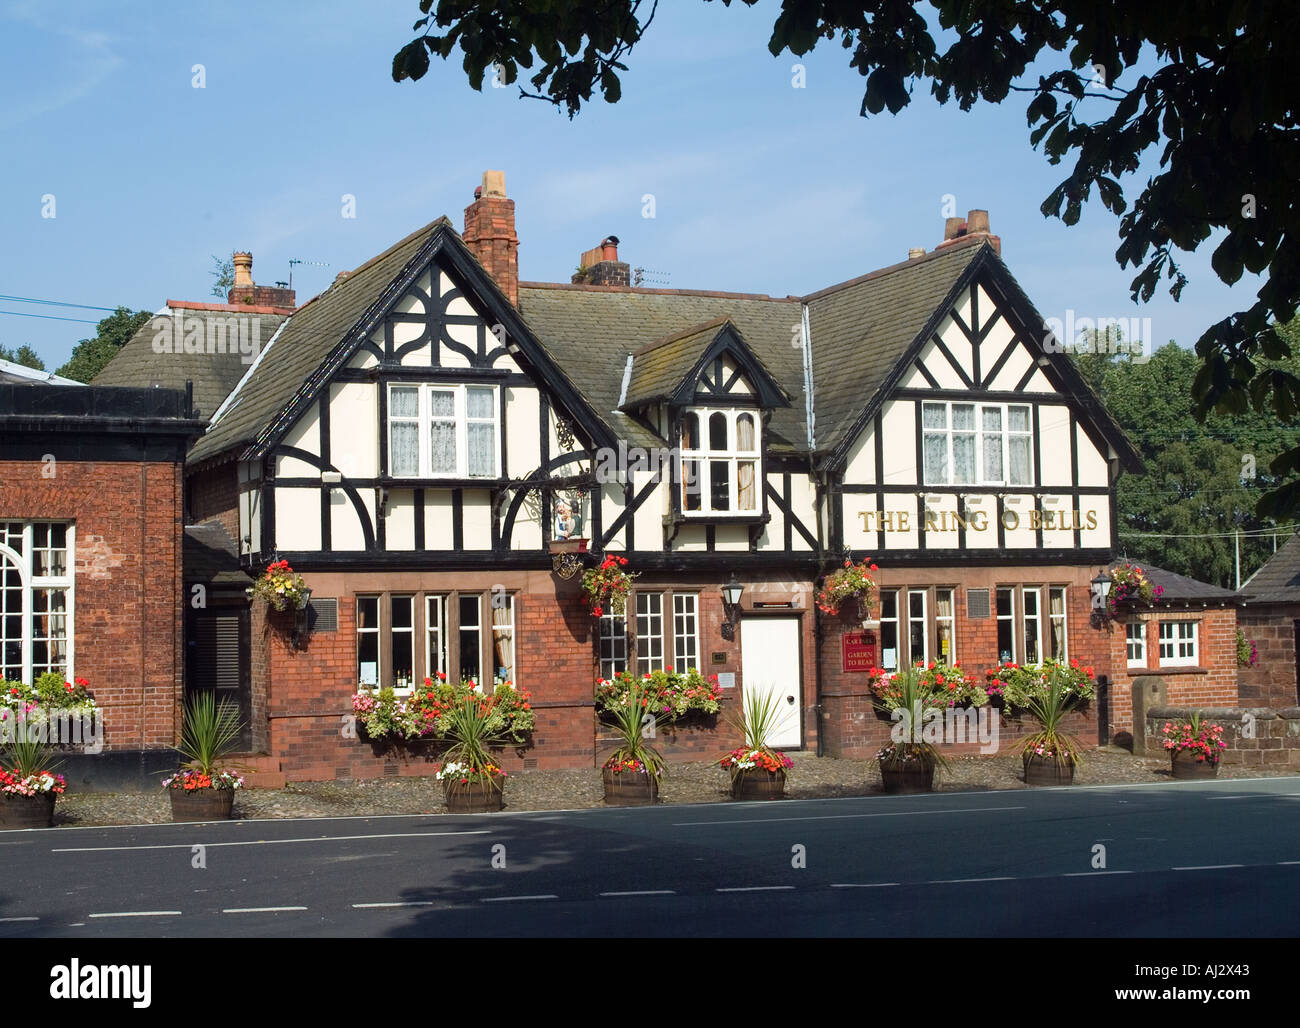 ring o bells Old English public house in Daresbury Cheshire The village where the author of Alice in Wonderland Lewis Carrol Stock Photo